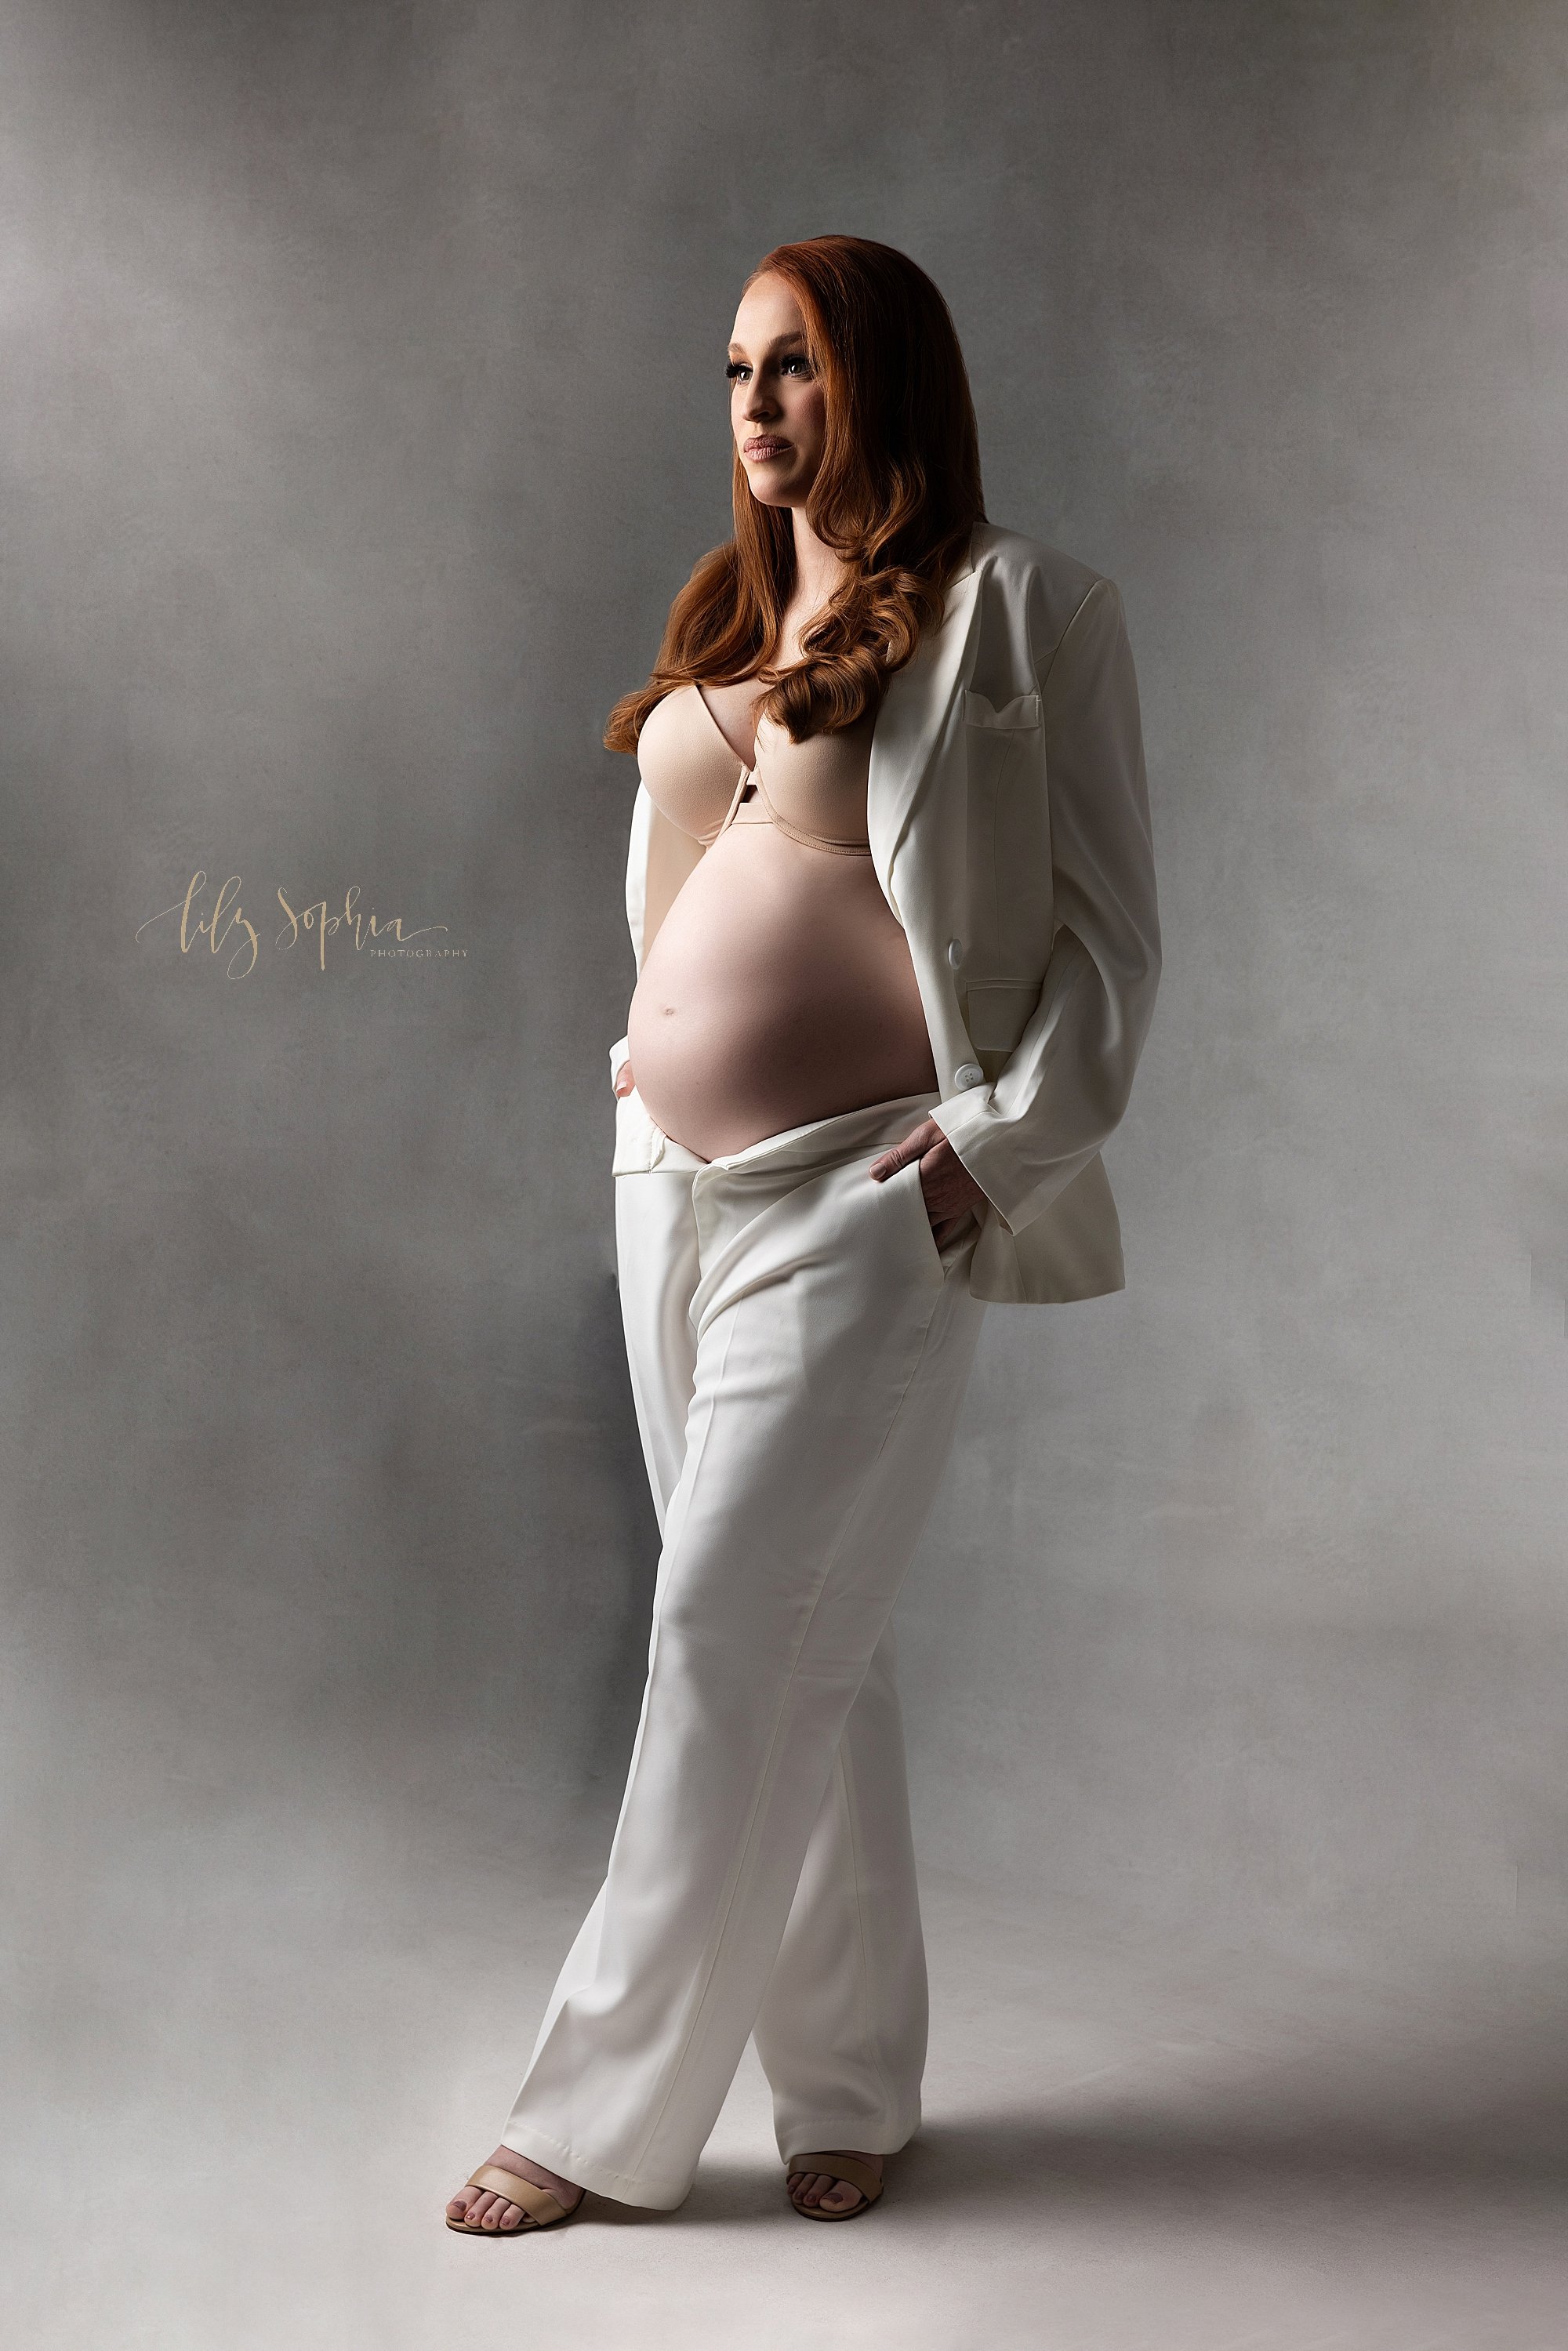  Modern maternity photo shoot using studio lighting with a red haired mother as she stands in a white suit with the jacket open to reveal her bra and her bare belly with the pants unzipped taken in a photography studio in Ponce City Market in Atlanta